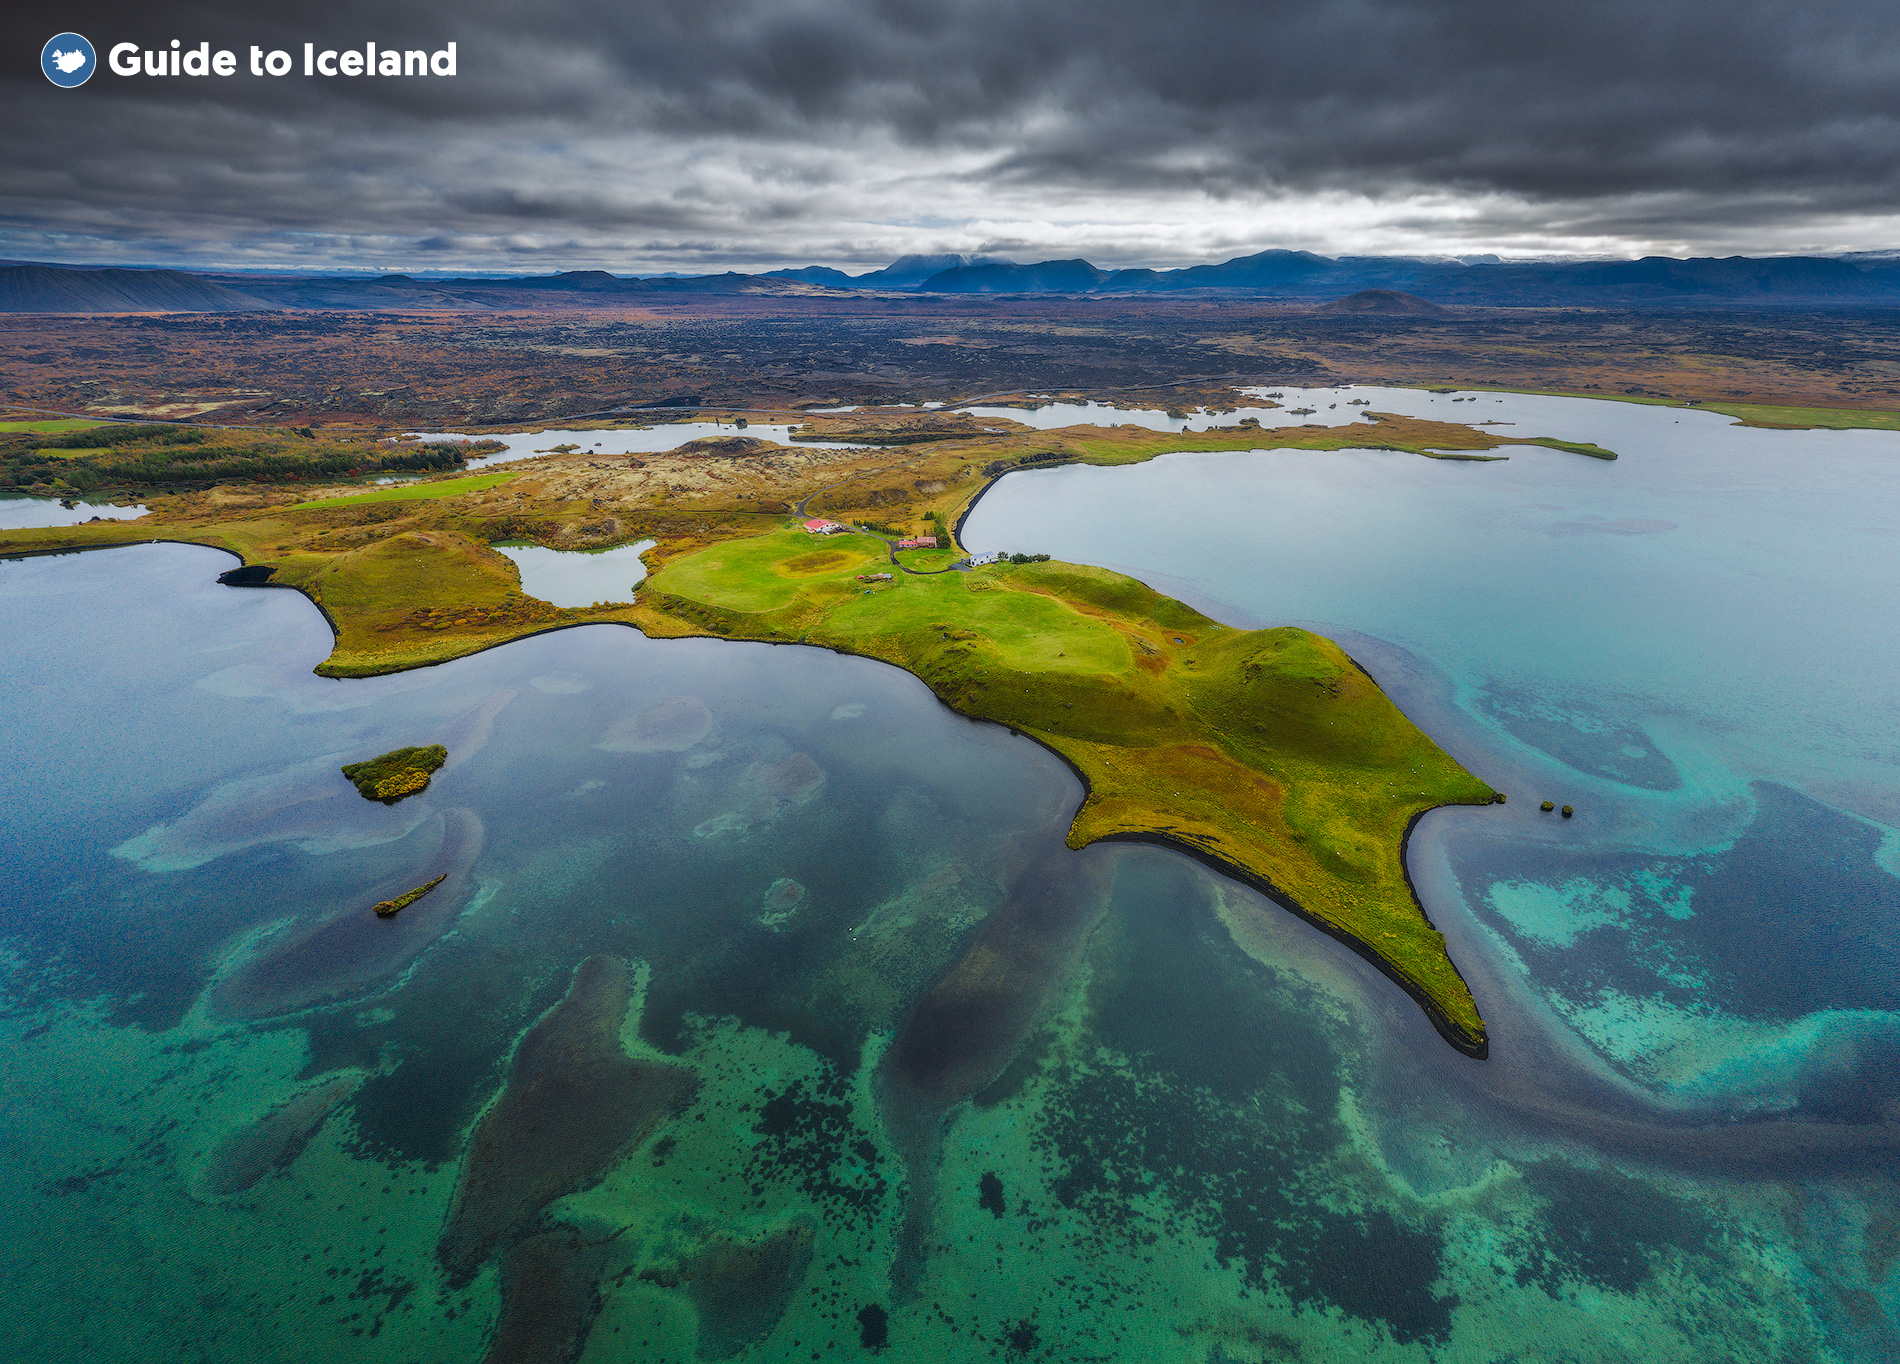 Lake myvatn is a vibrant location in the North of Iceland